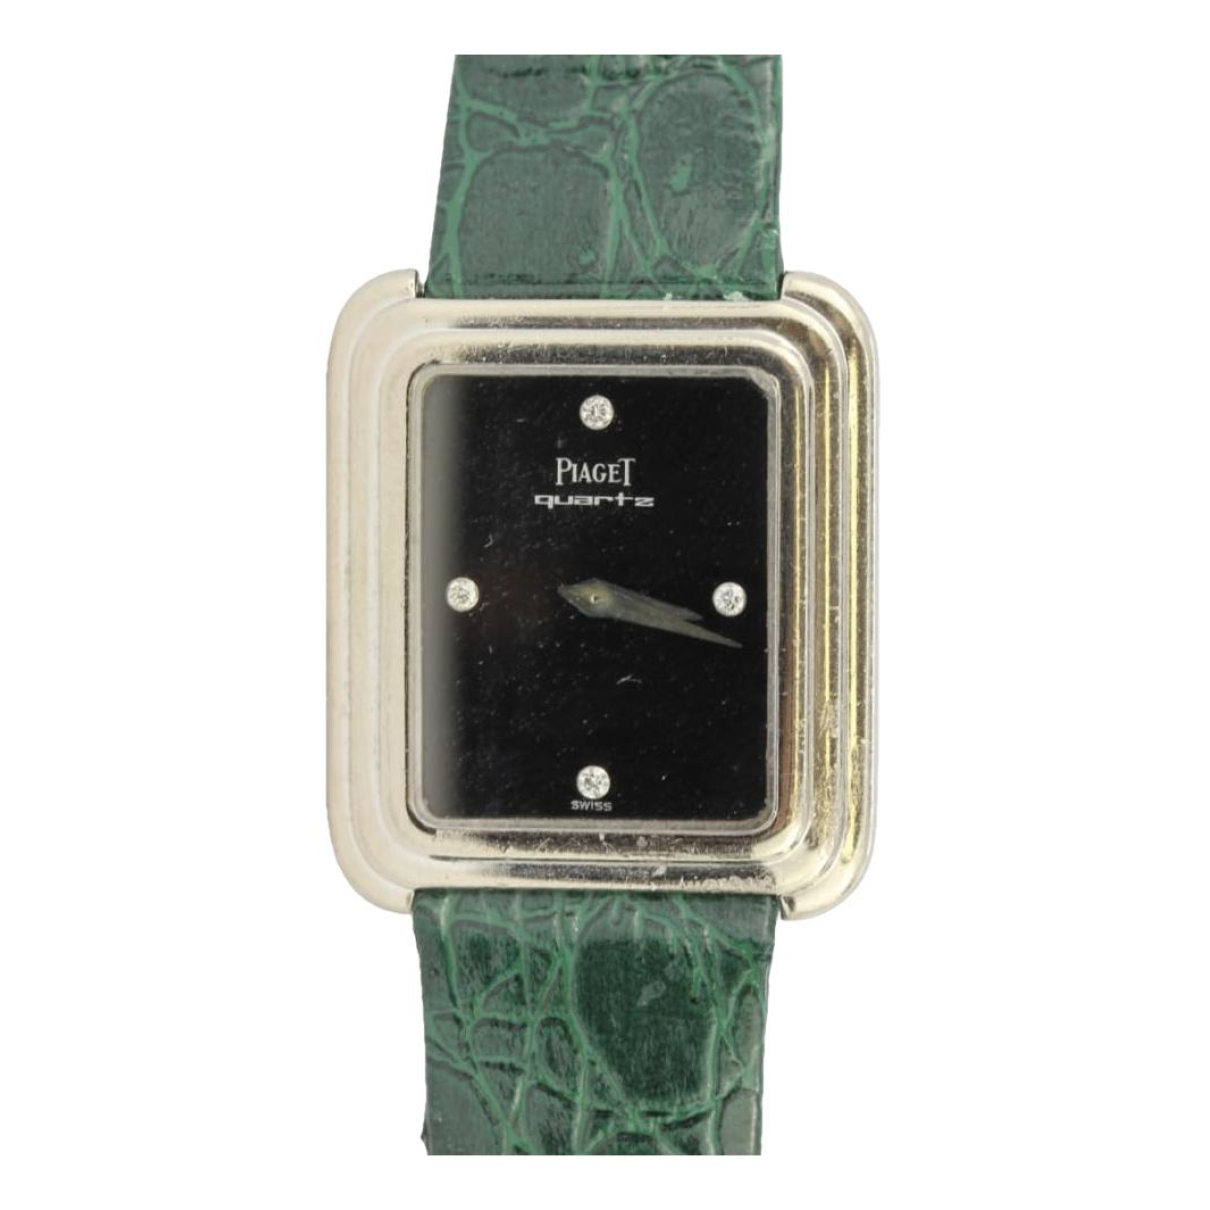 image of Piaget White gold watch